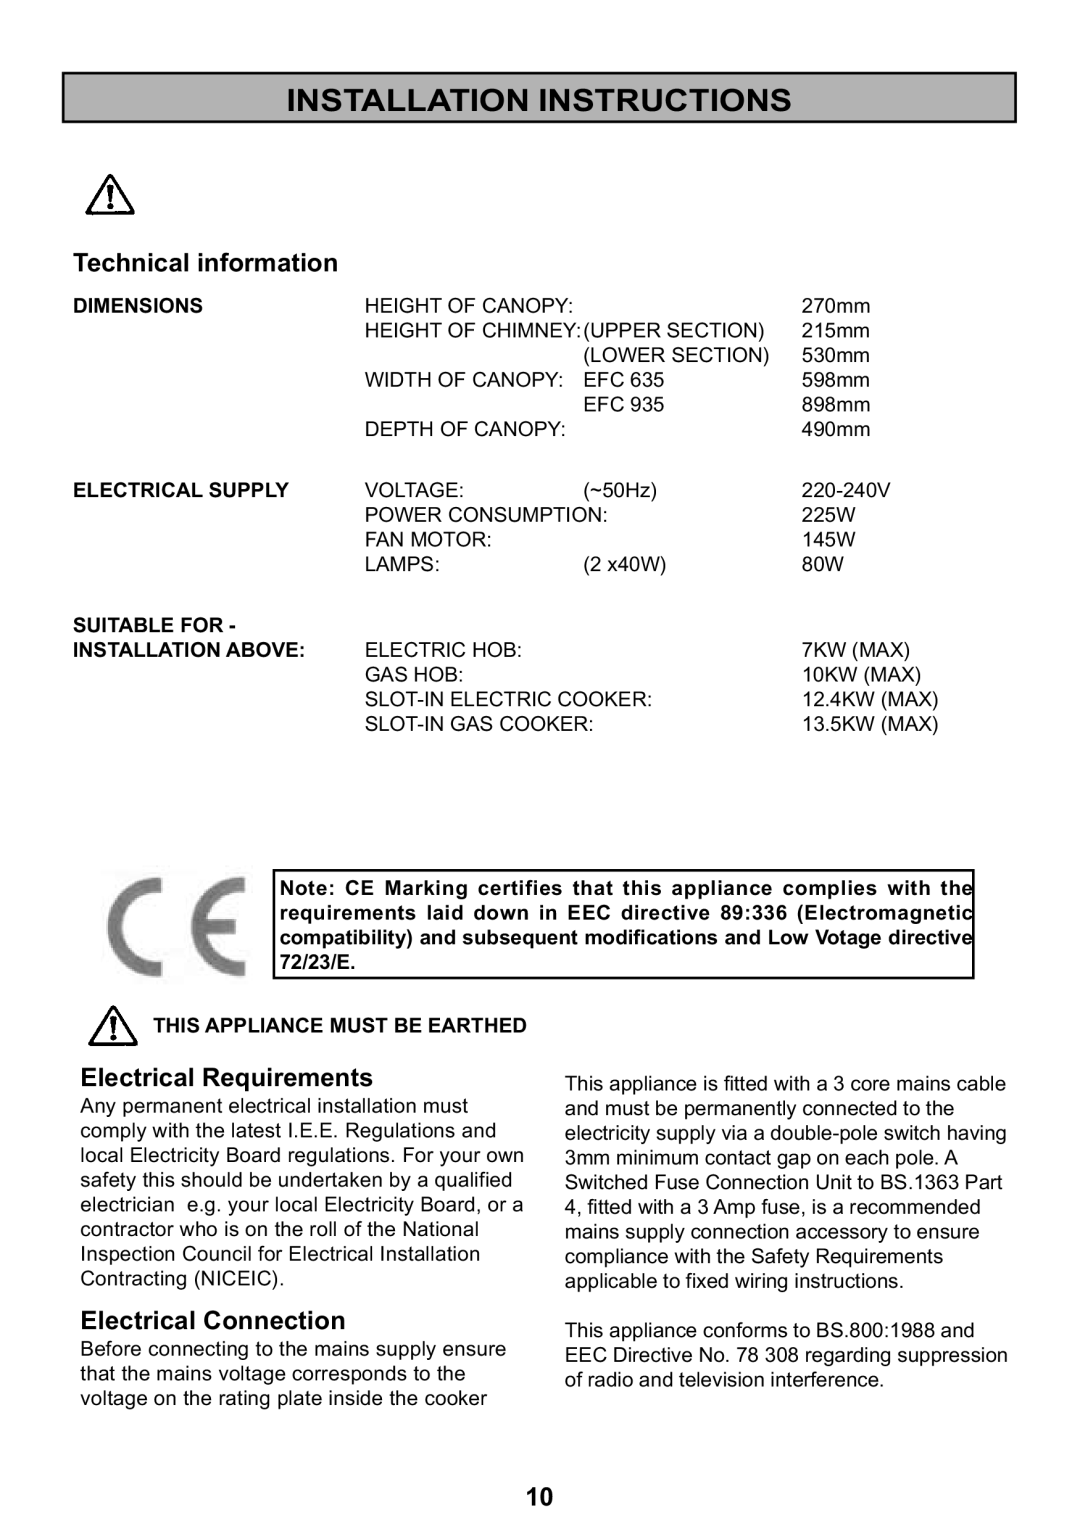 Electrolux EFC 635, EFC 935 Installation Instructions, Dimensions, Electrical Supply, Suitable For, Installation Above 